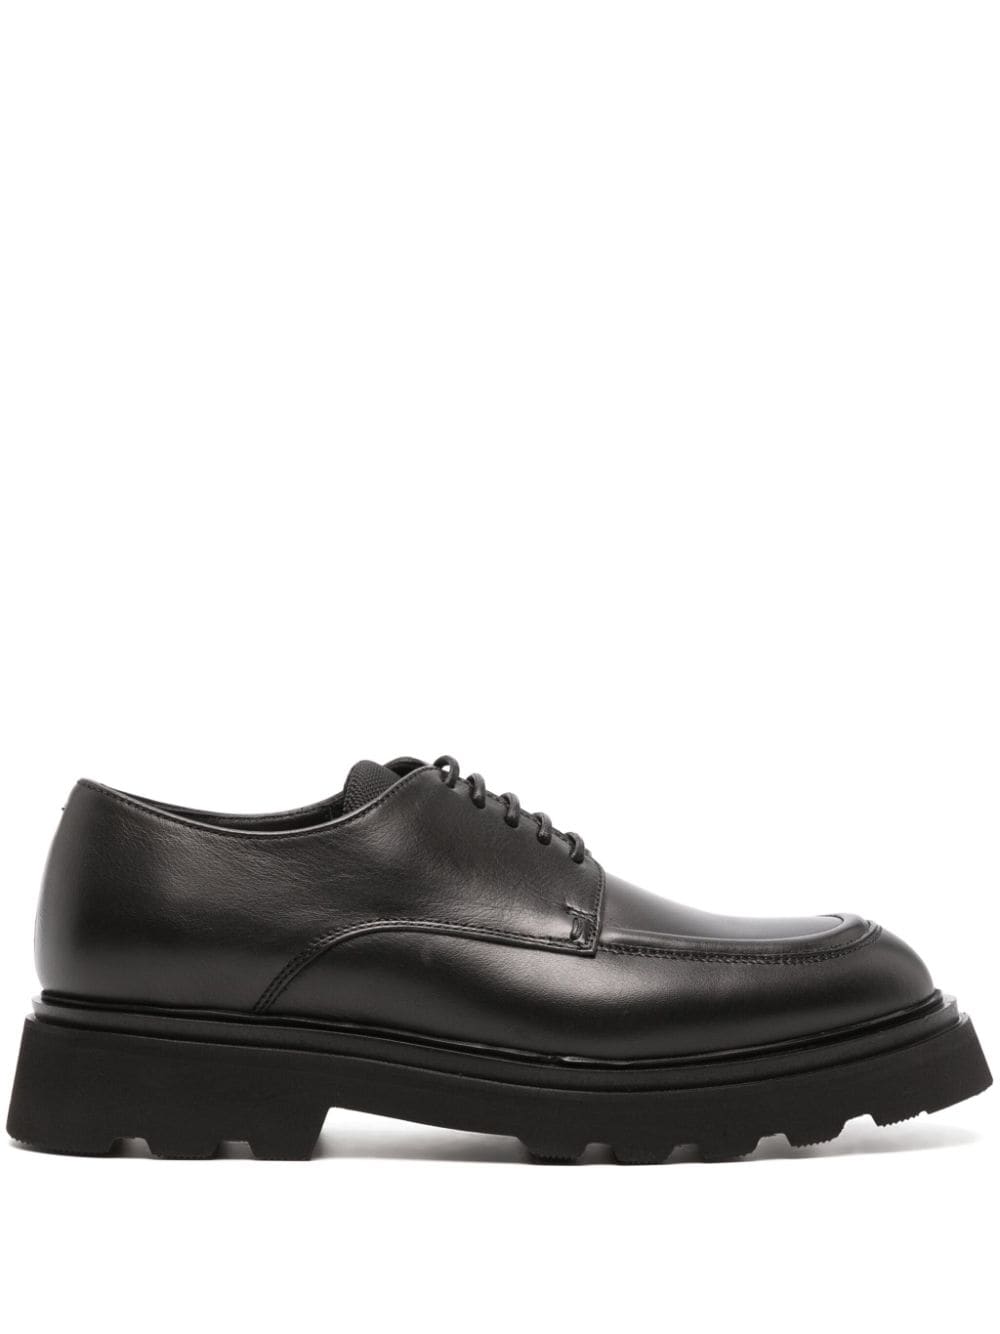 Doucal's lace-up leather brogues - Black von Doucal's